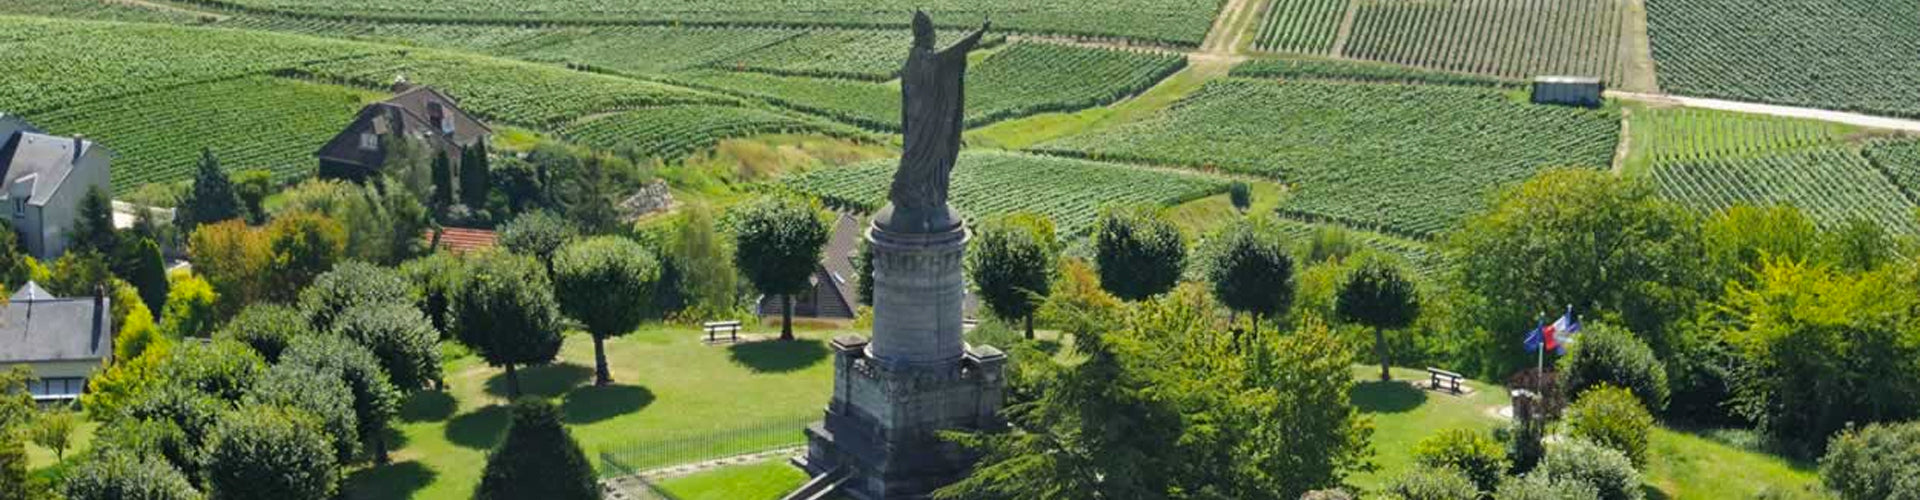 Statue of Pope Urban II Ovelooking Vines in Chatillon sur Marne